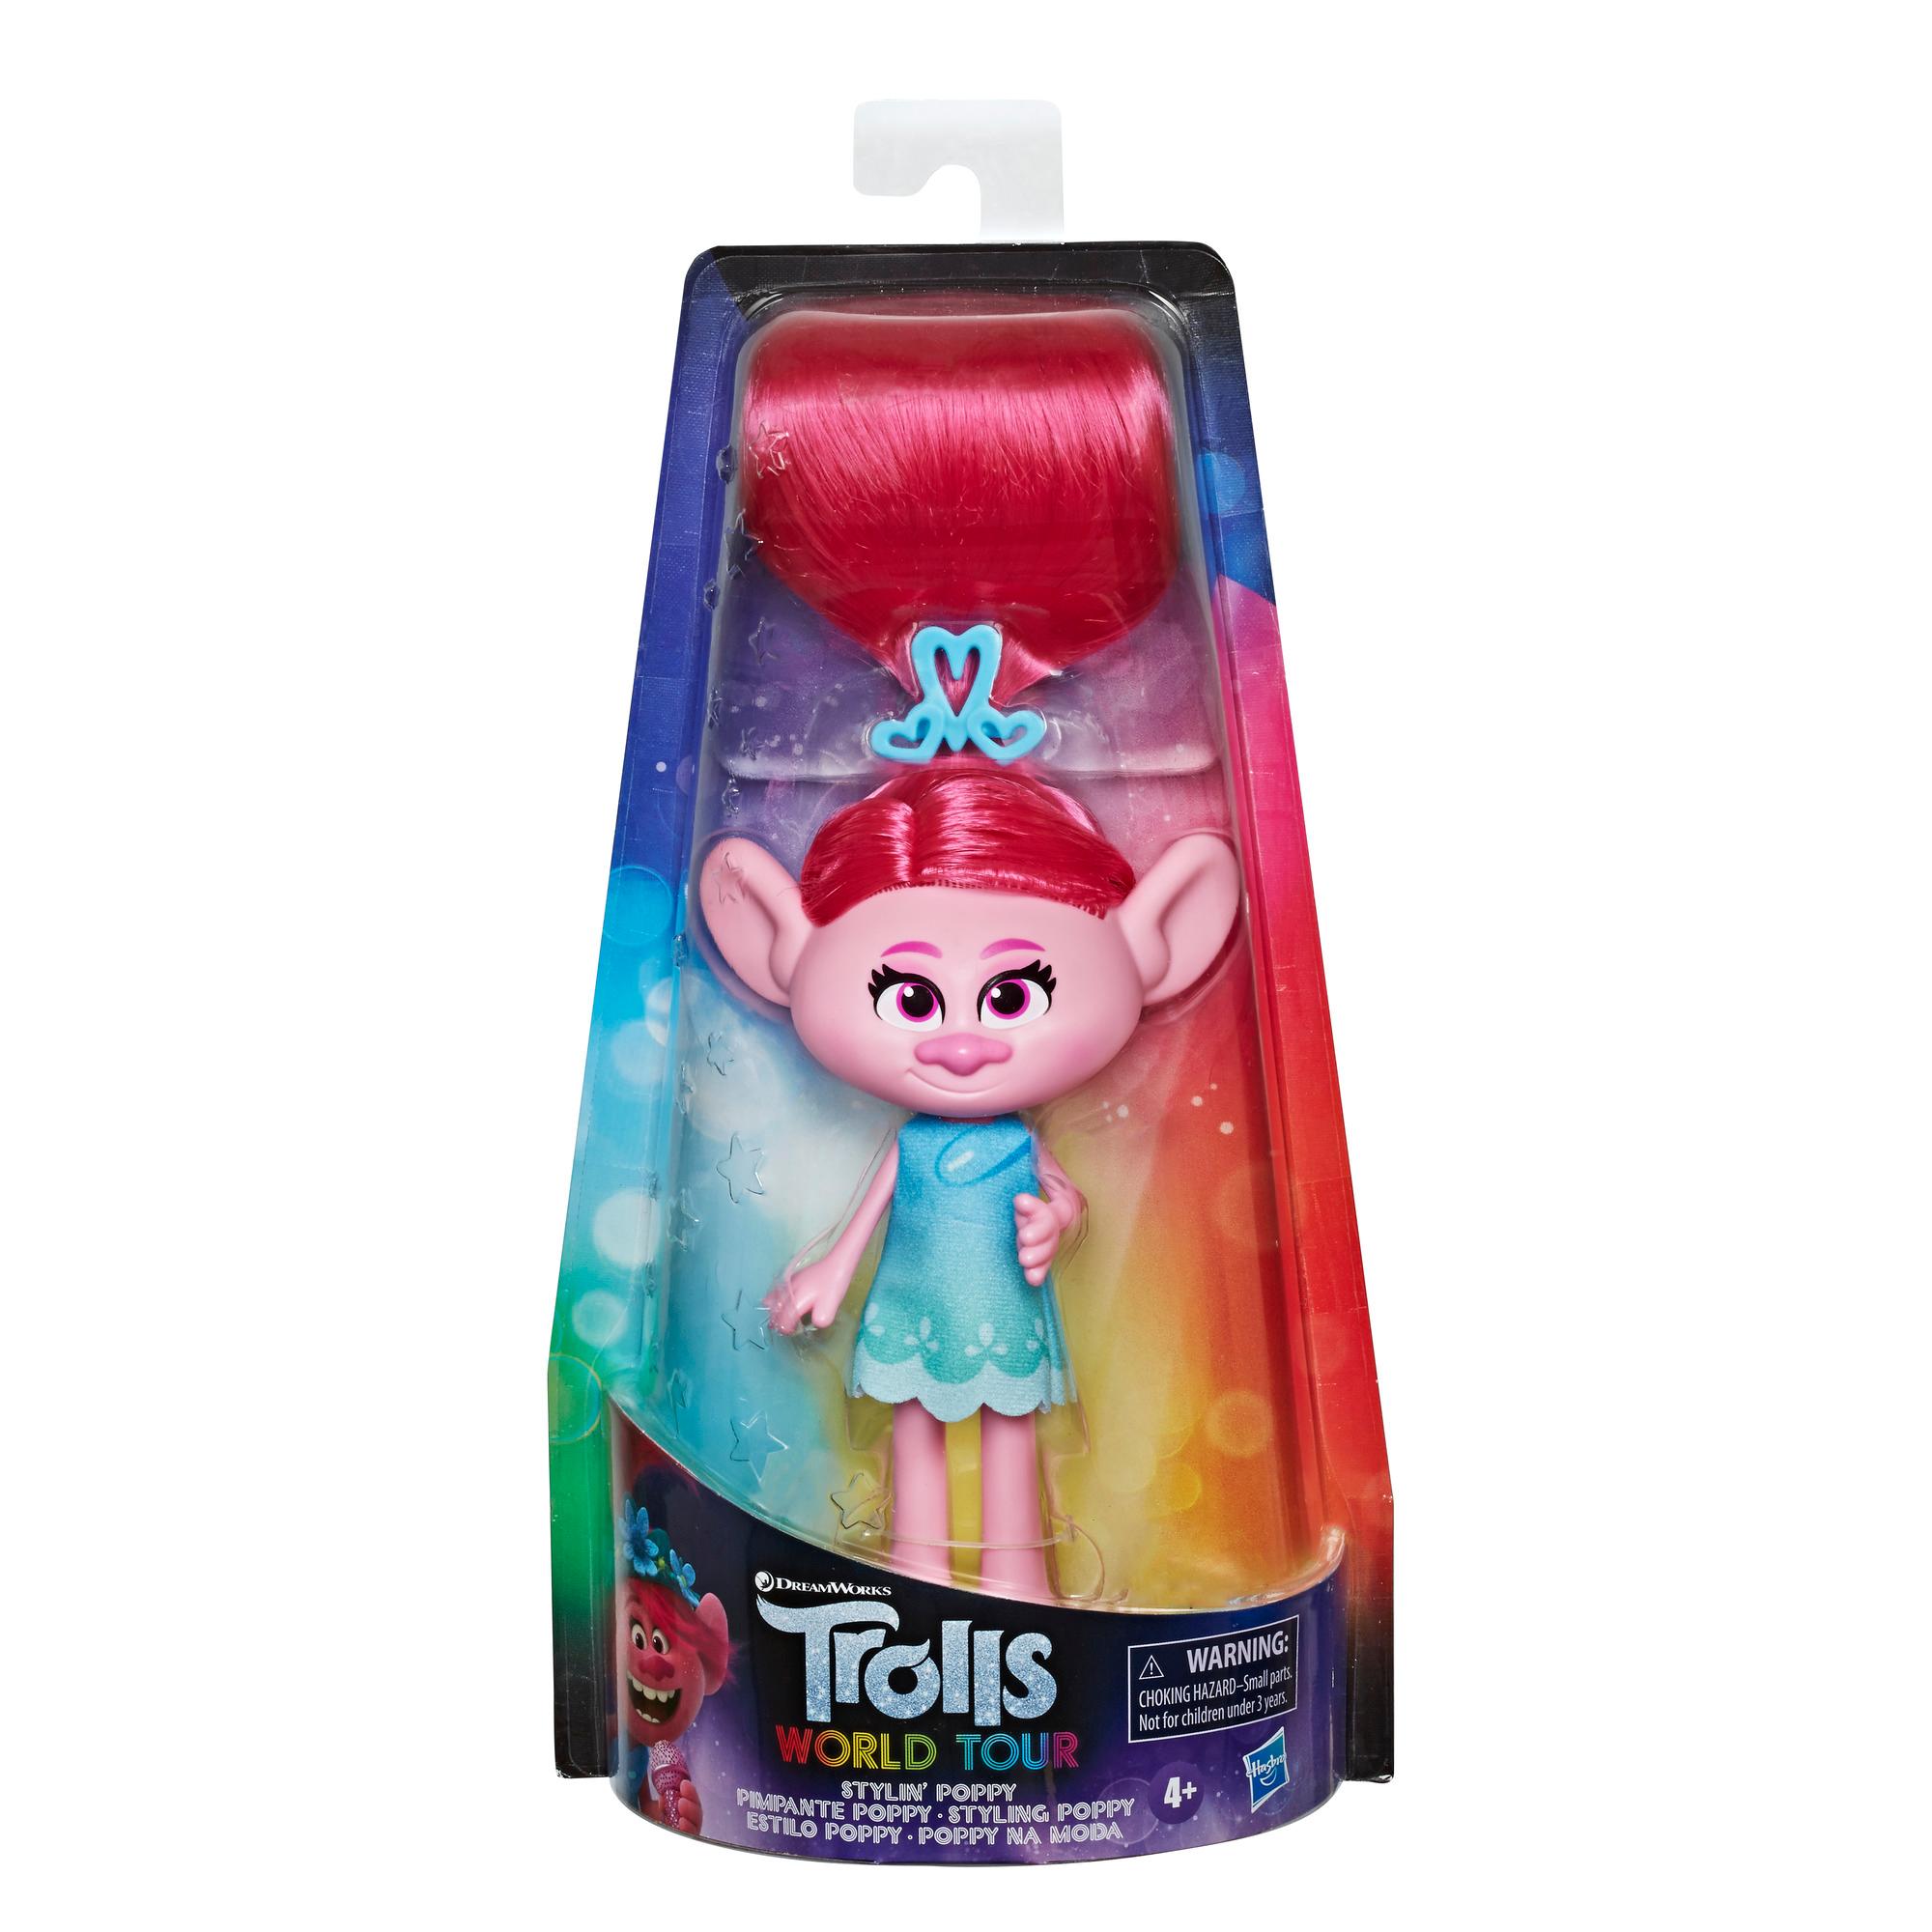 DreamWorks Trolls Stylin' Poppy Fashion Doll with Removable Dress and Hair Accessory, Inspired by Trolls World Tour